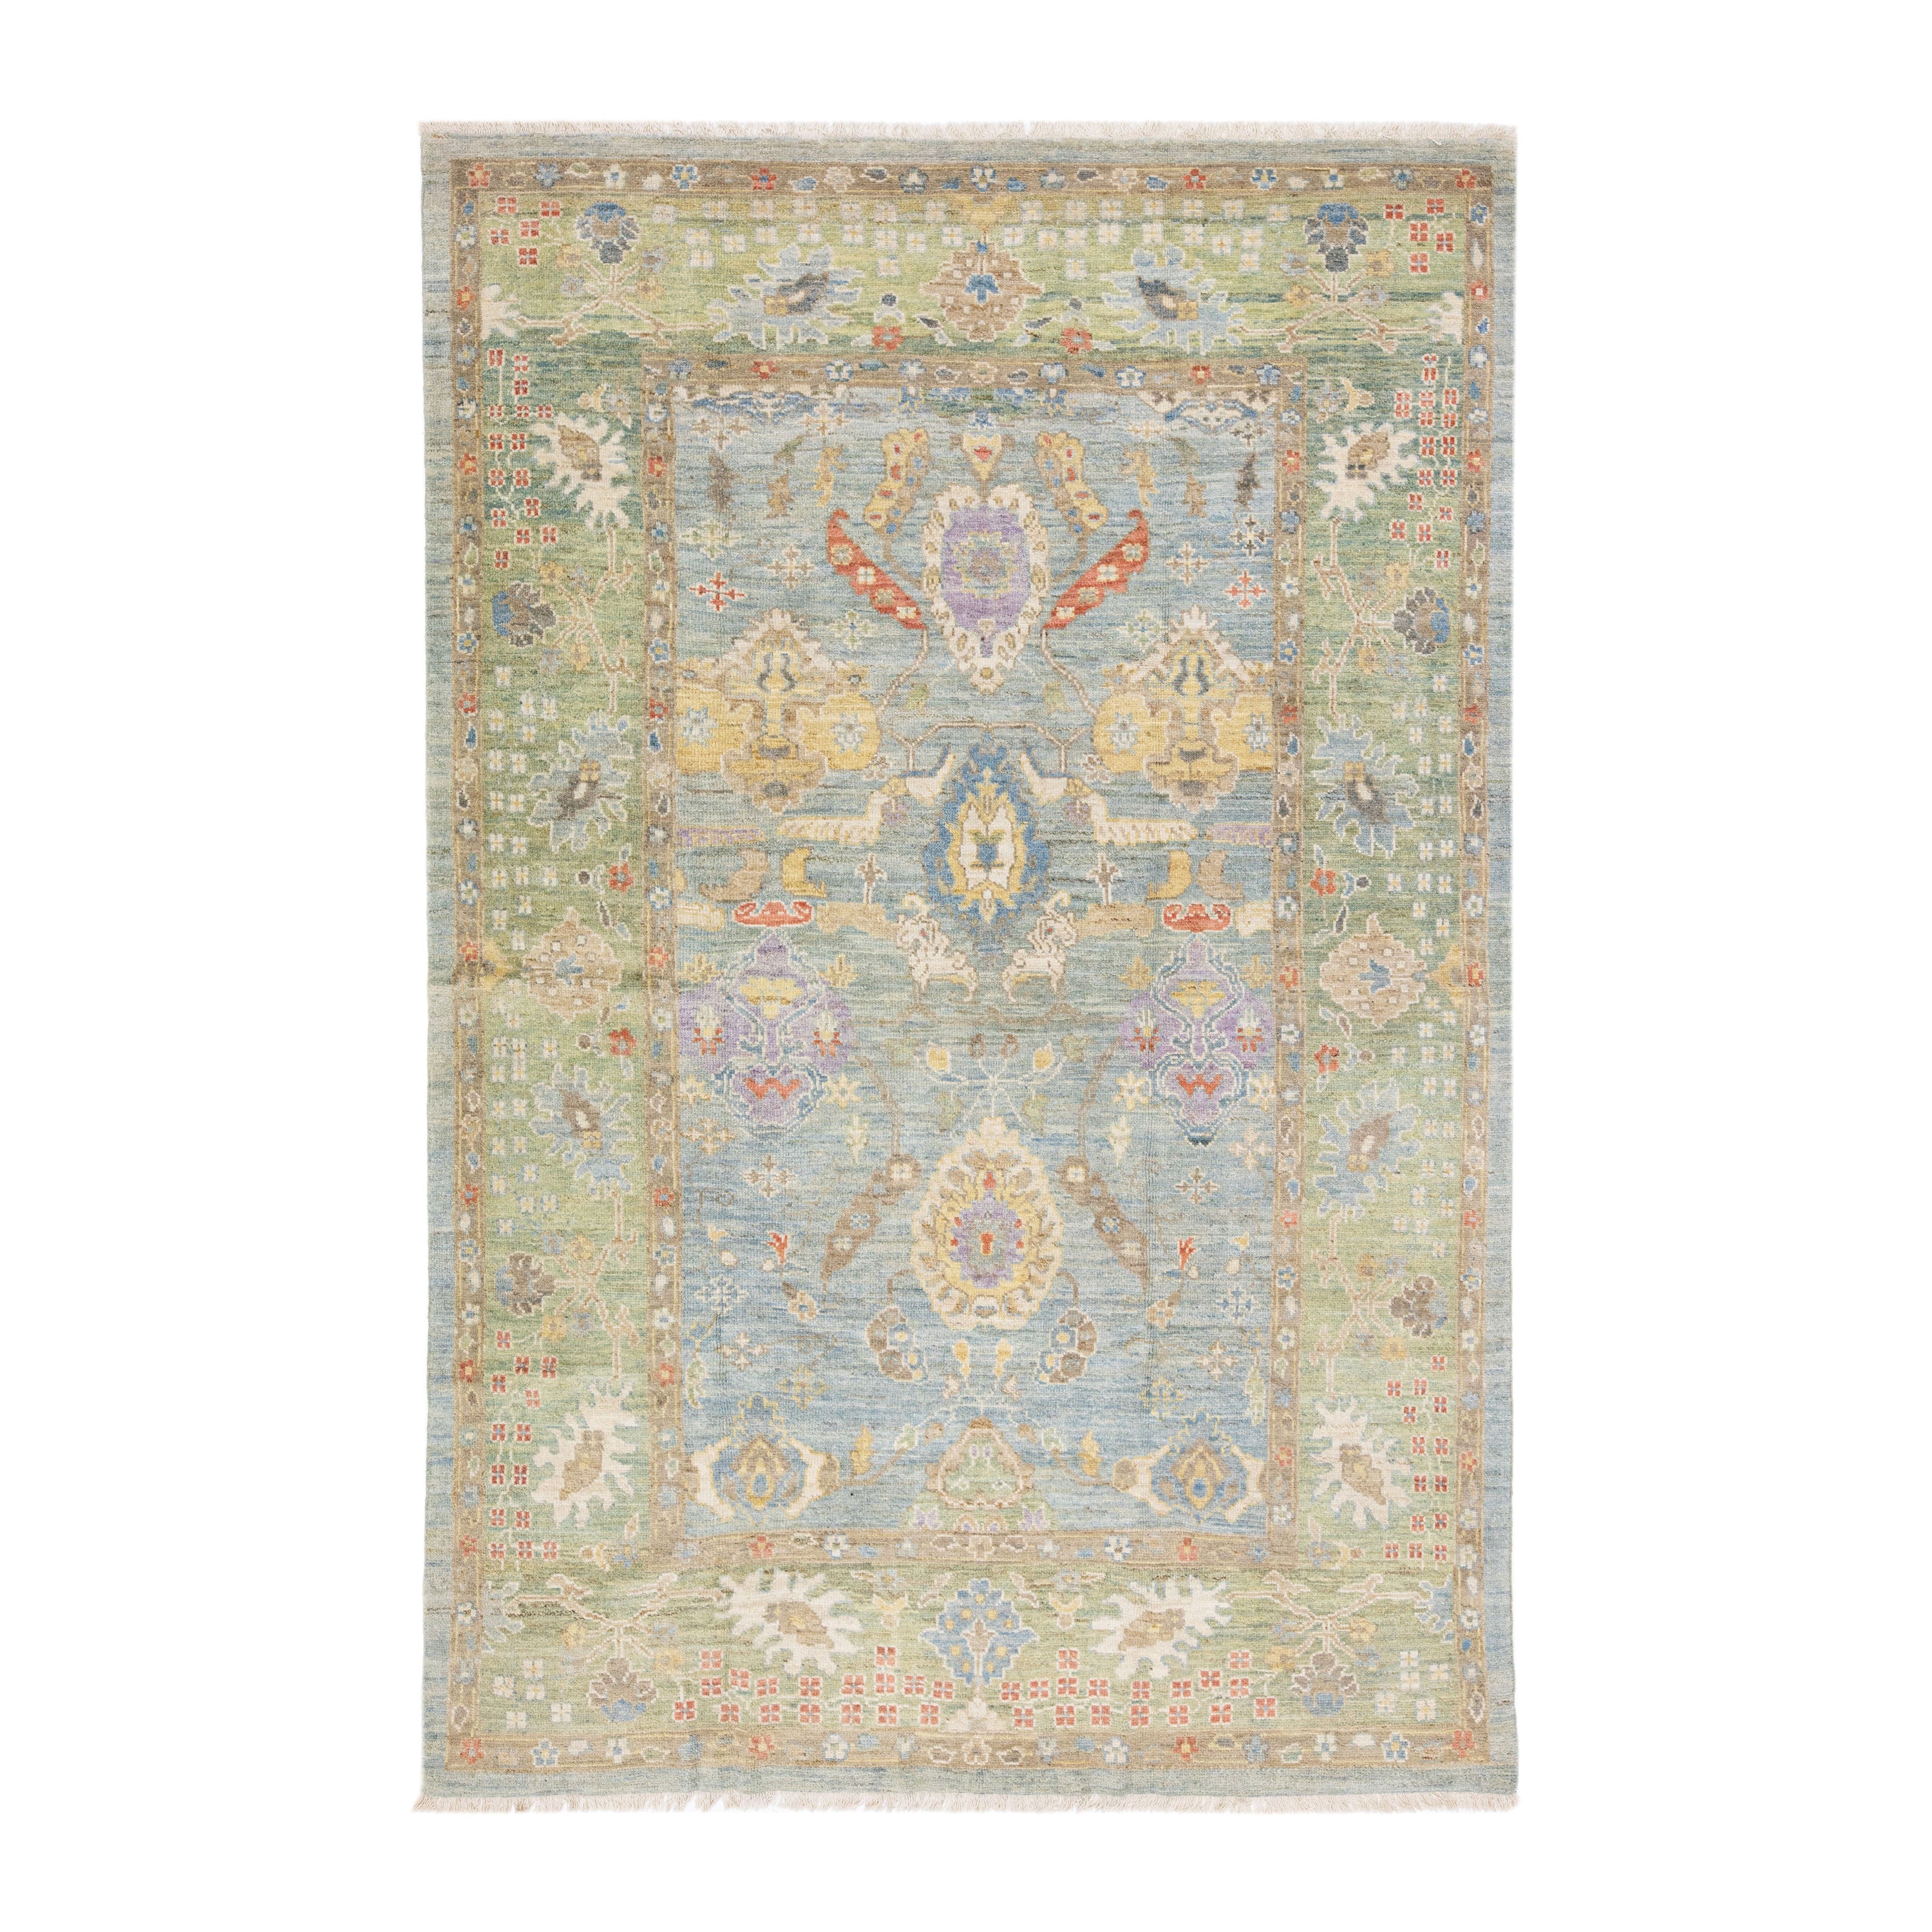 Handmade Modern Oushak Style Blue & Green Wool Rug with Floral Motif